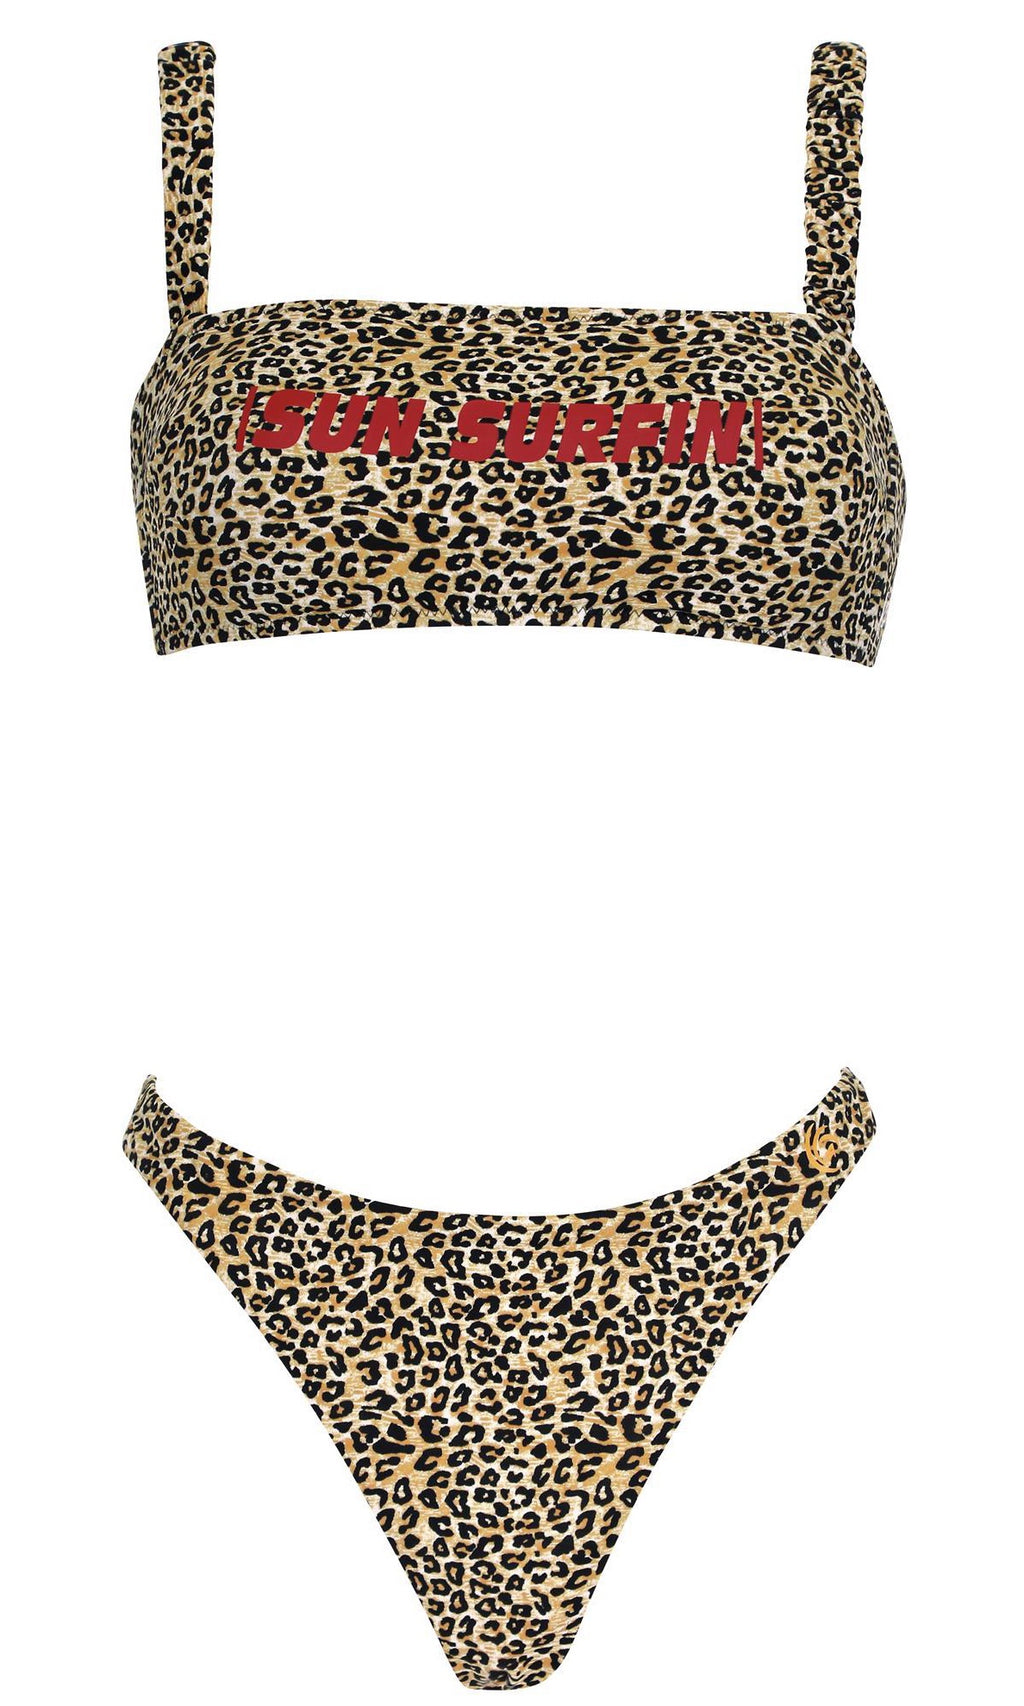 Bikini Set Cougar Jungle, Special Order B Cup to D Cup